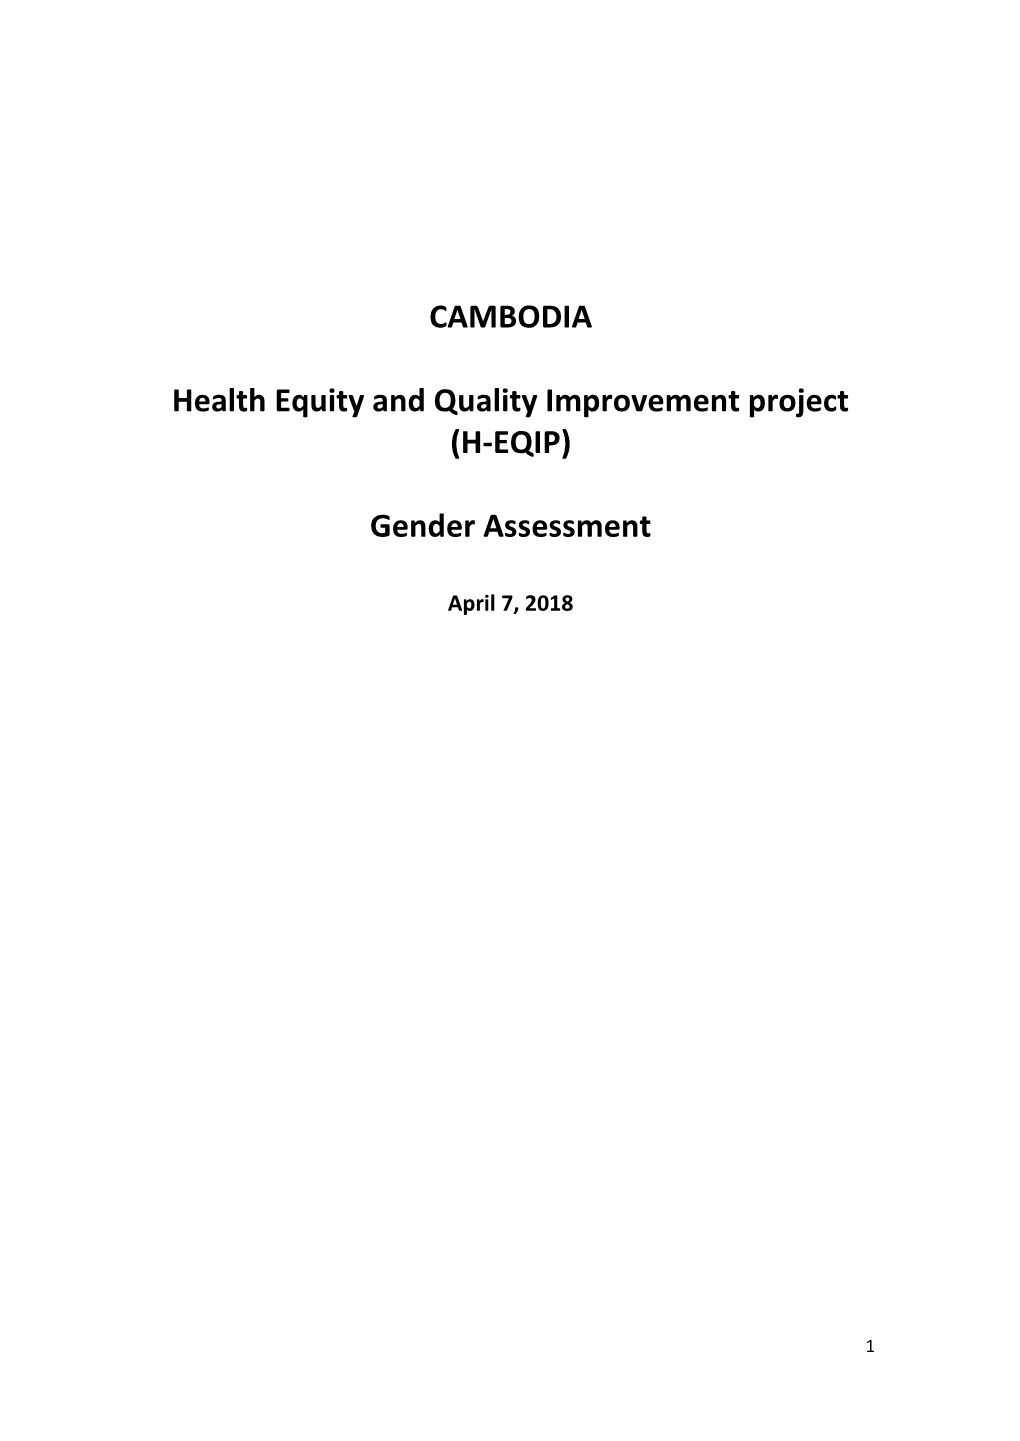 CAMBODIA Health Equity and Quality Improvement Project (H-EQIP